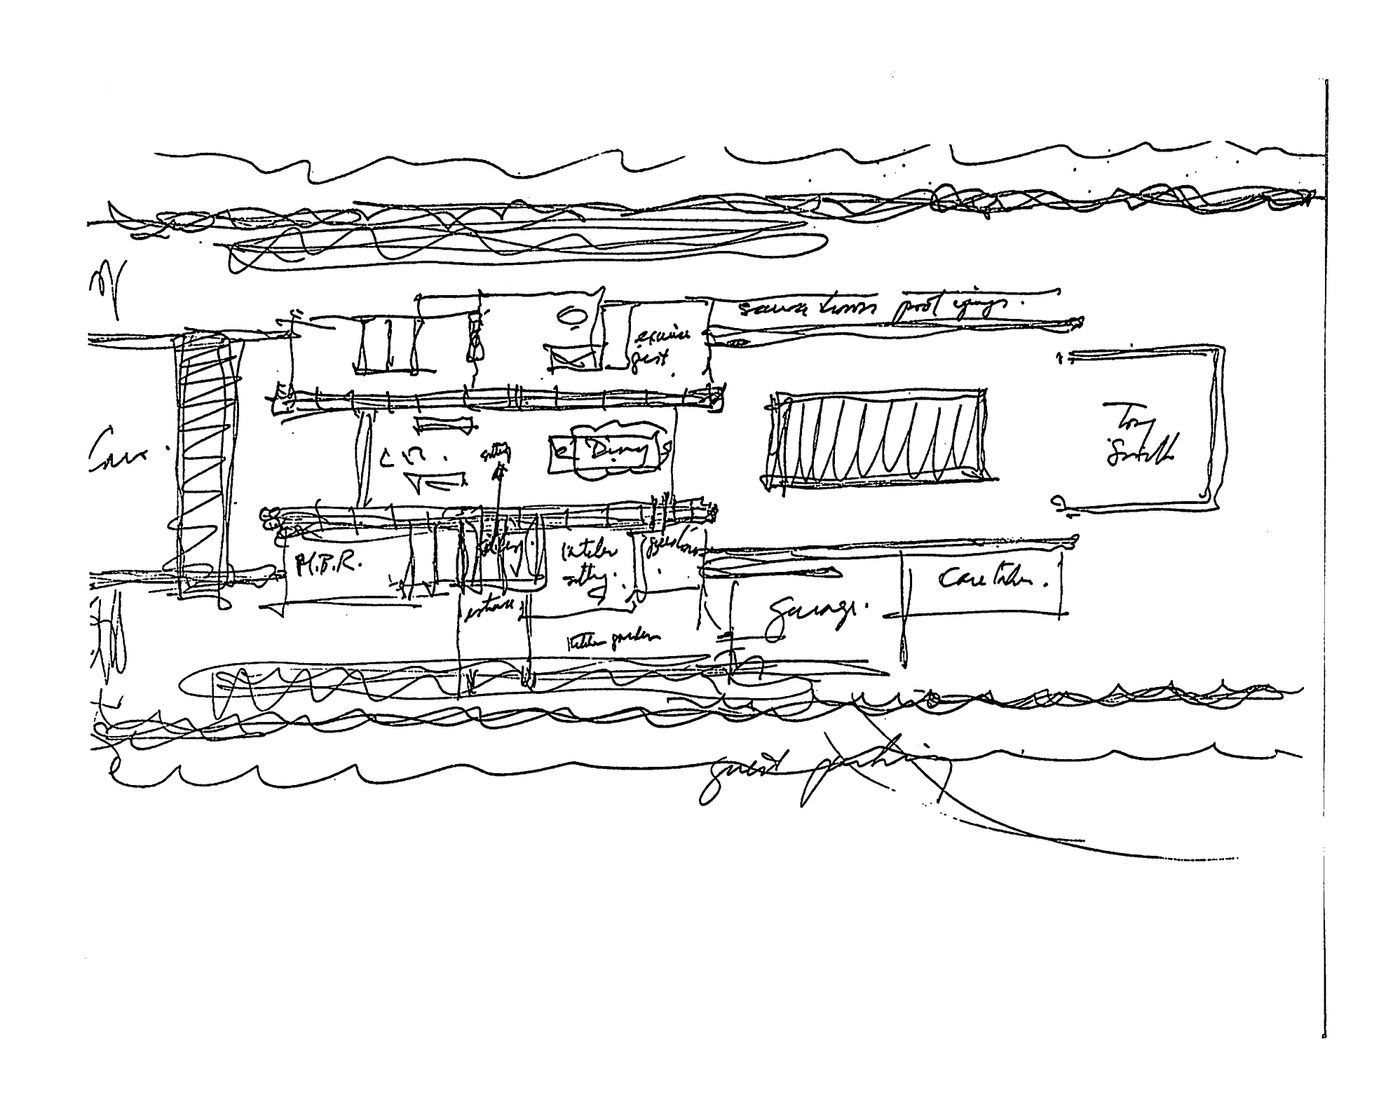 Sketch, plan, Private Residence, Pacific North-West (also called "Bagley Wright House")